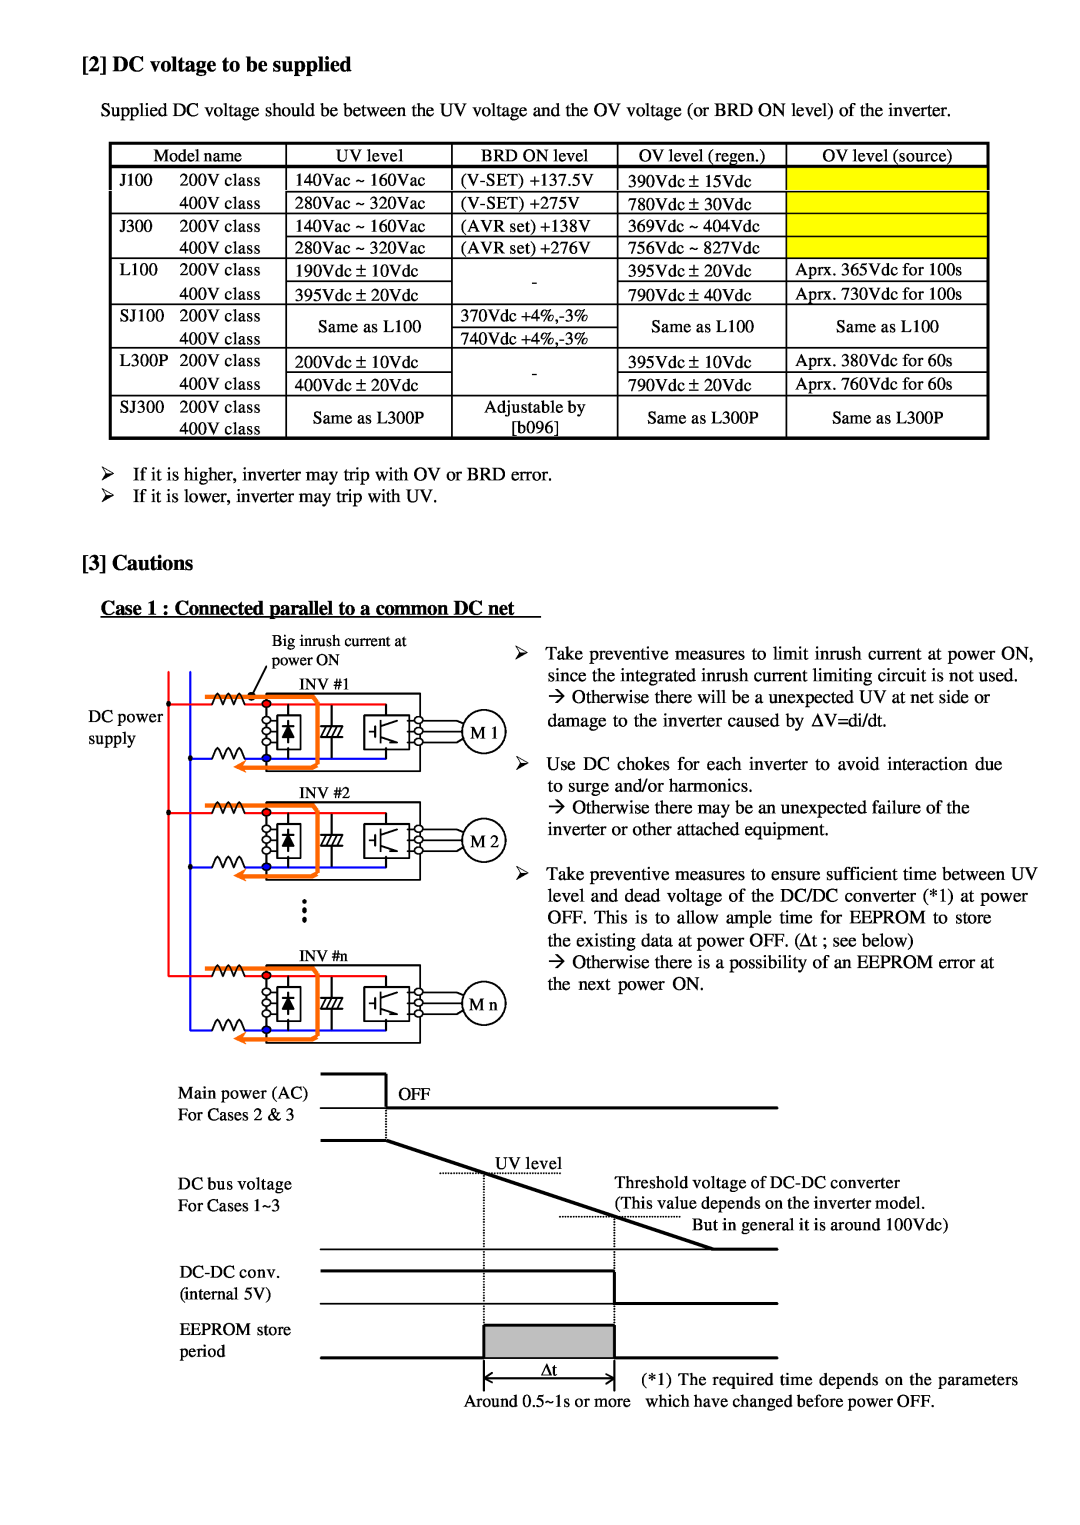 Hitachi AN091802-1 instruction manual DC voltage to be supplied, 3Cautions, Case 1 Connected parallel to a common DC net 